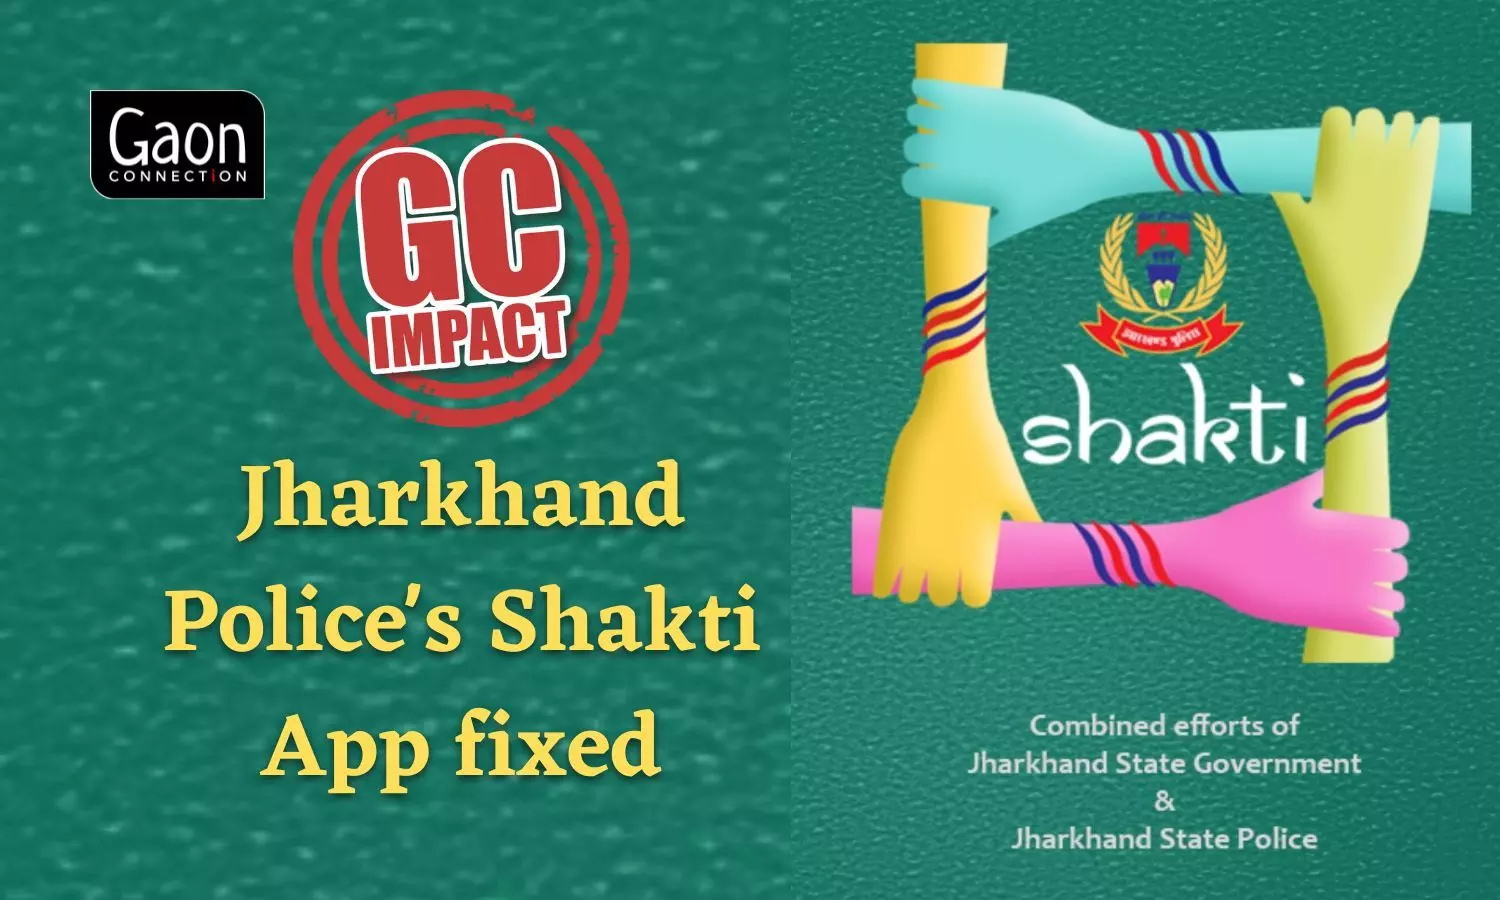 GC Impact: Shakti App of Jharkhand Police, which was not functioning, has now been fixed